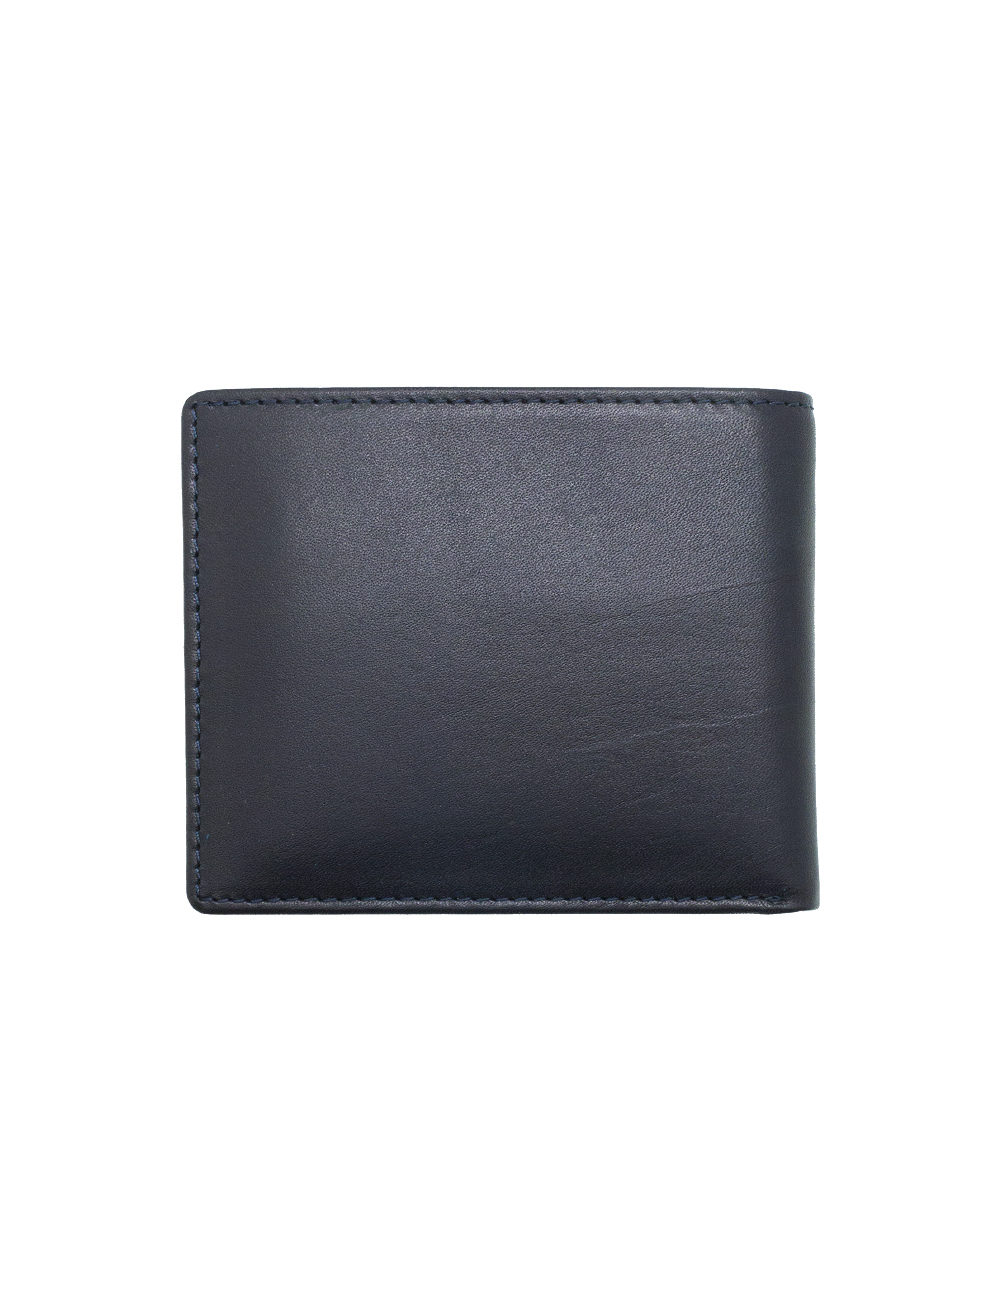 Navy 100% Genuine Top Grain Leather 2-in-1 Bifold 12CC Wallet with Contrasting Inner Colours and Lining and RFID Anti-theft SLG14.NOB1